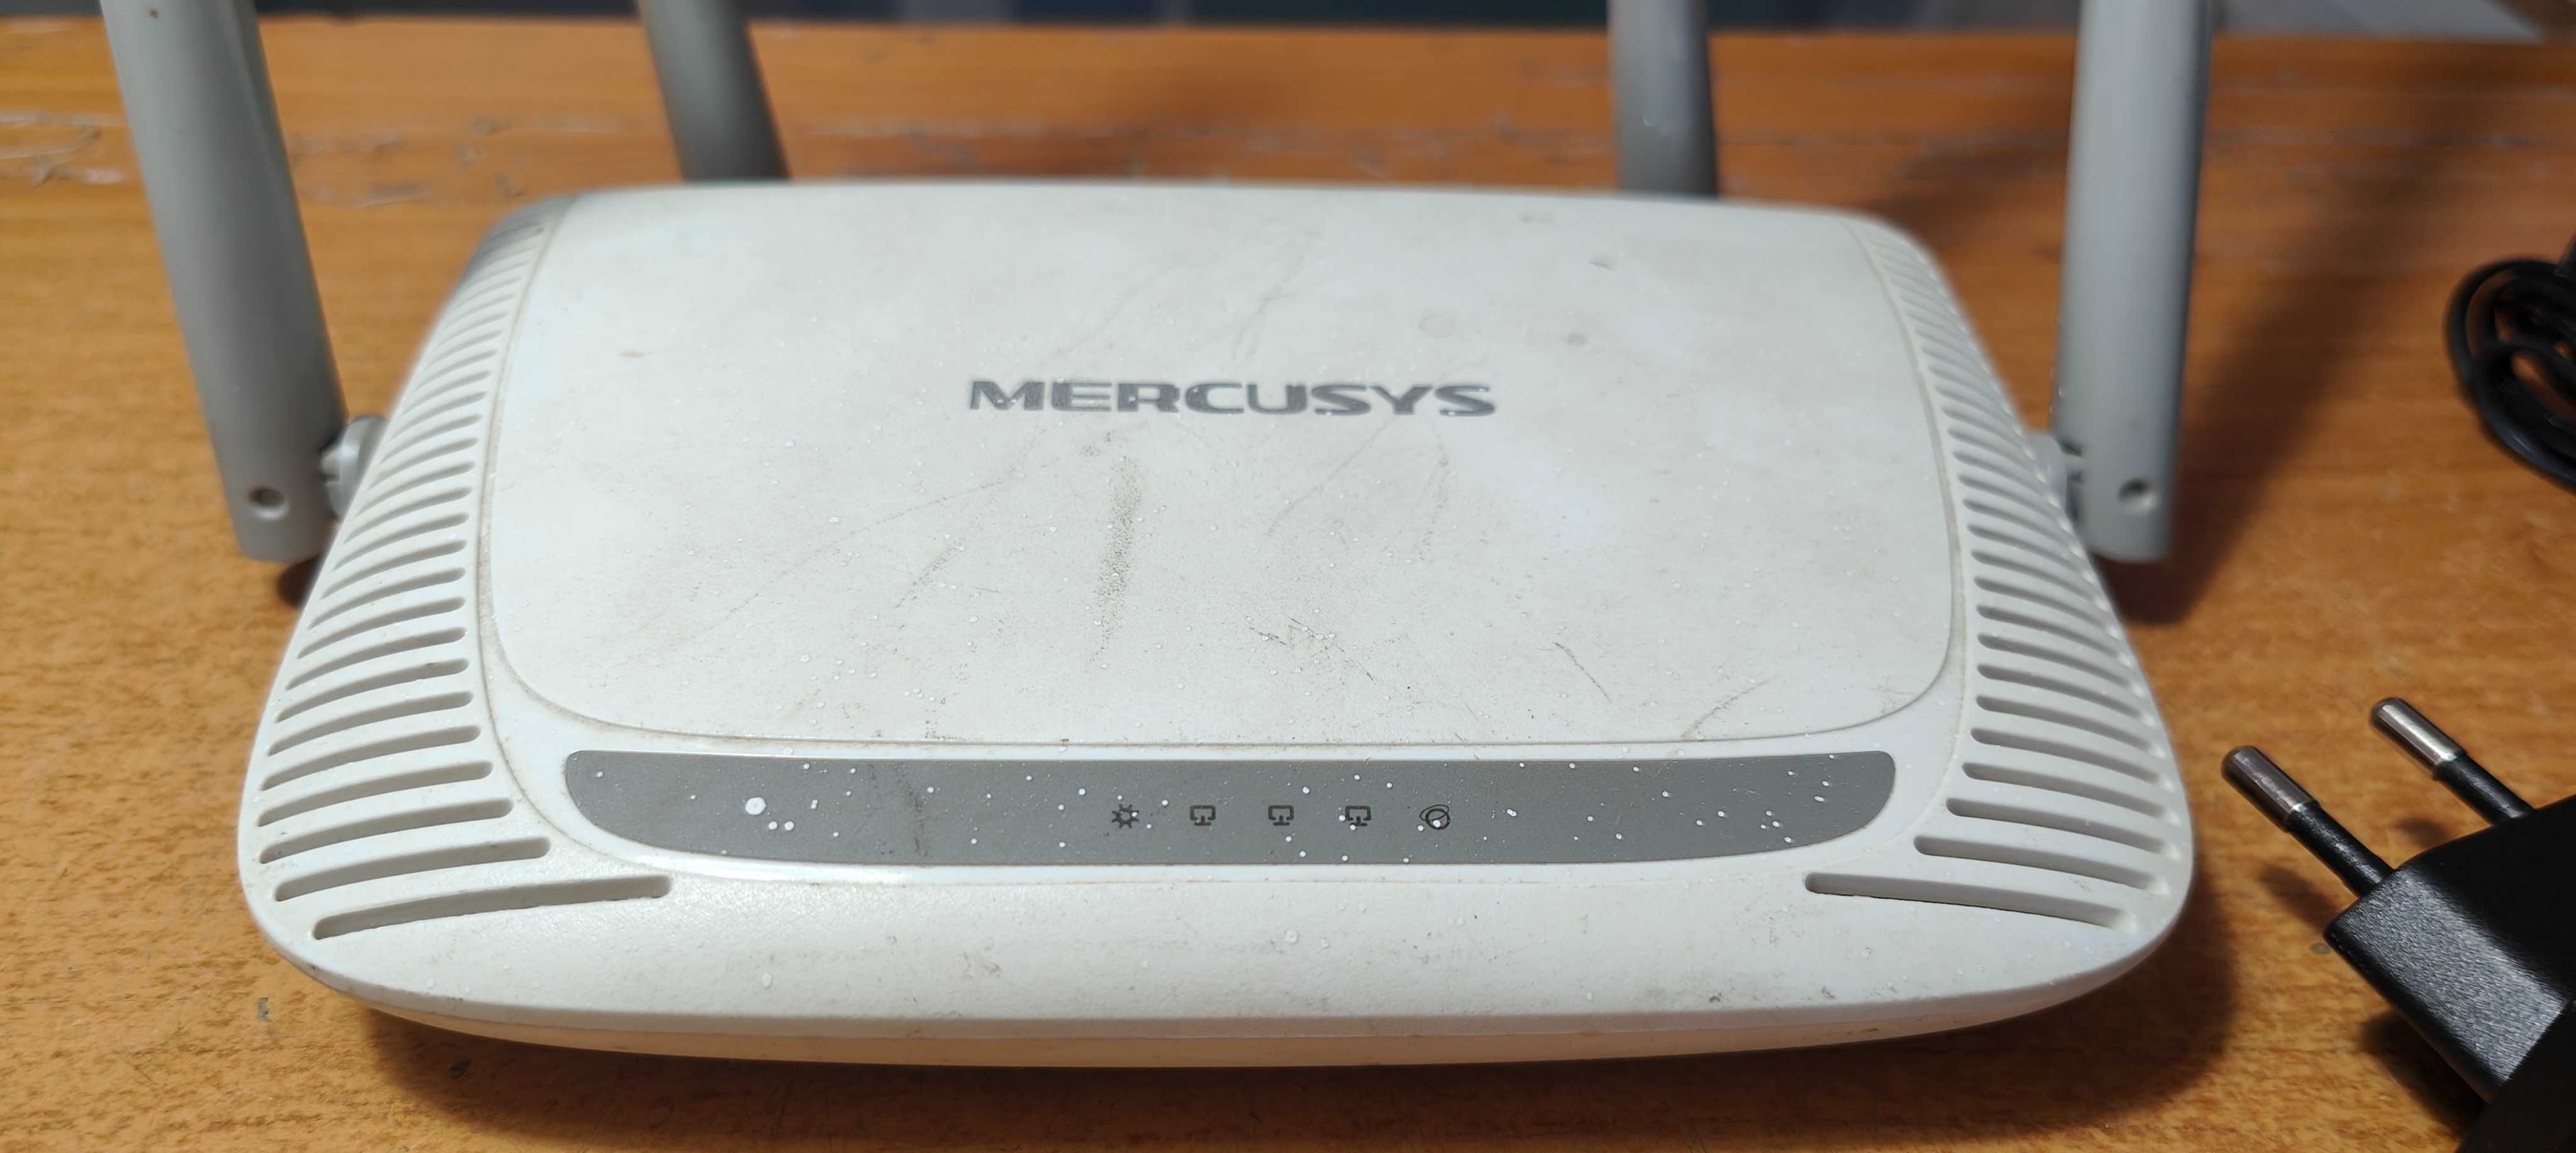 Router Mercusys 100 Mbps